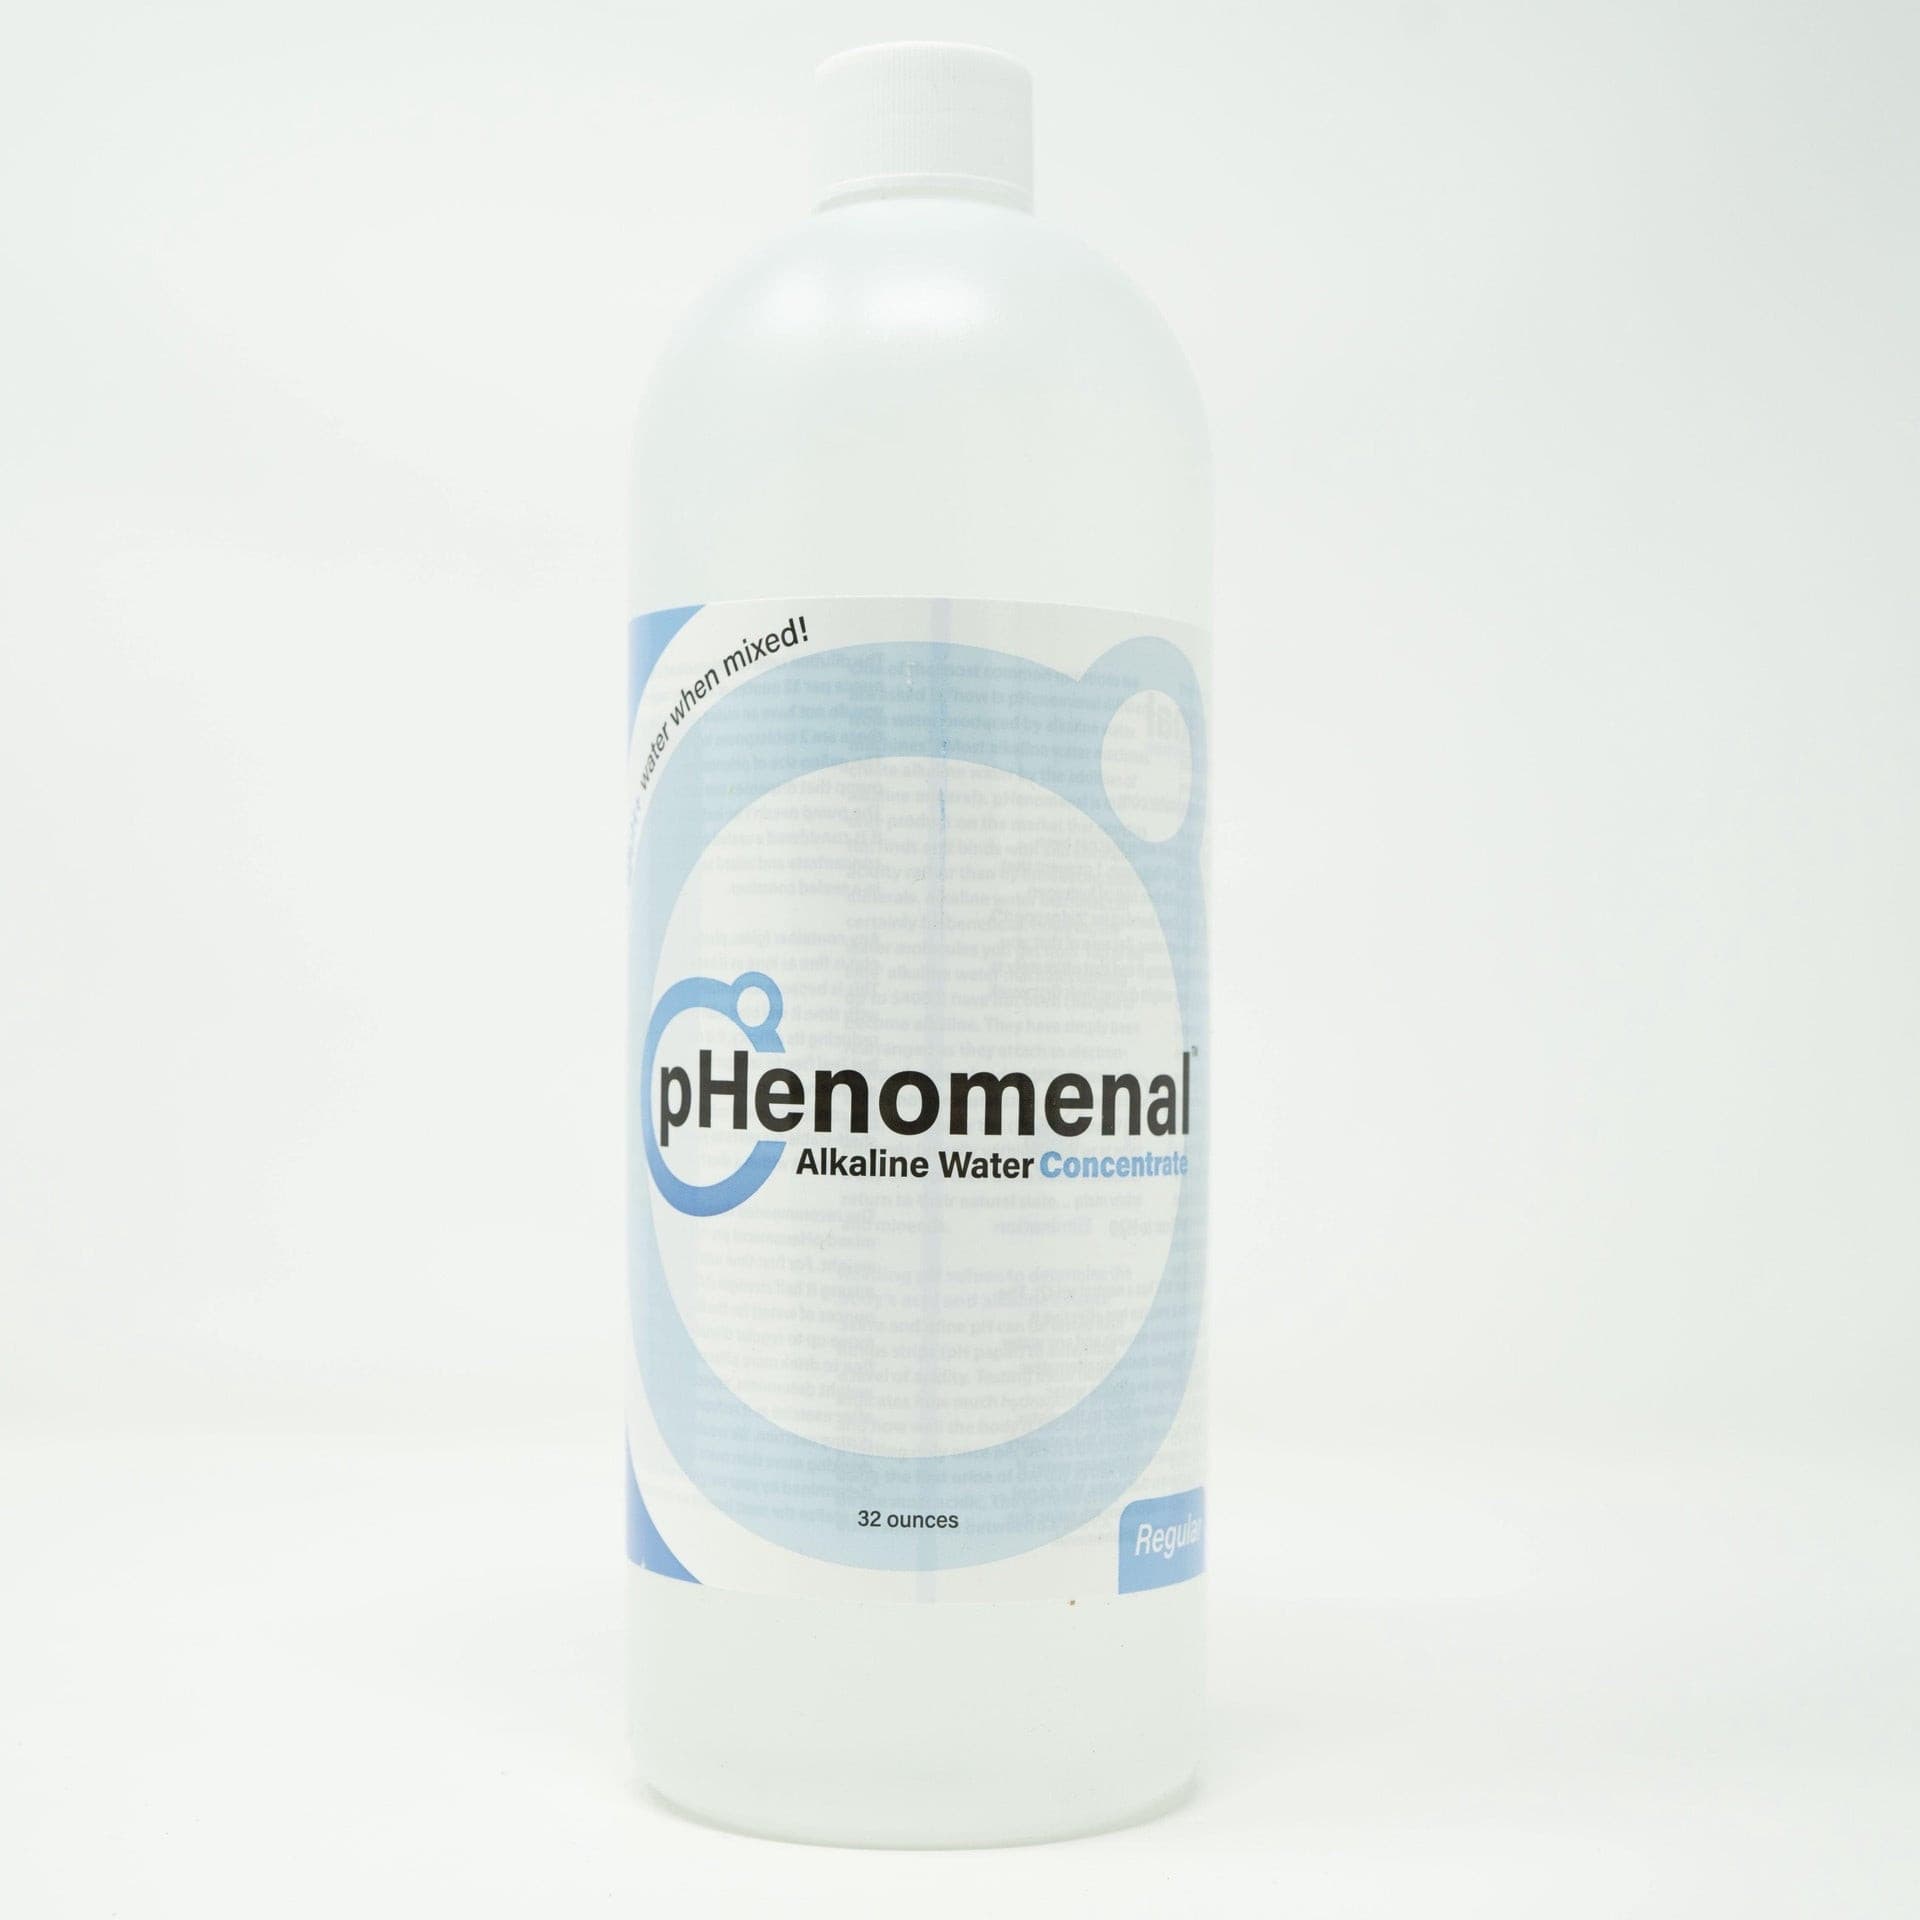 pHenomenal Alkaline Water Concentrate 32oz.